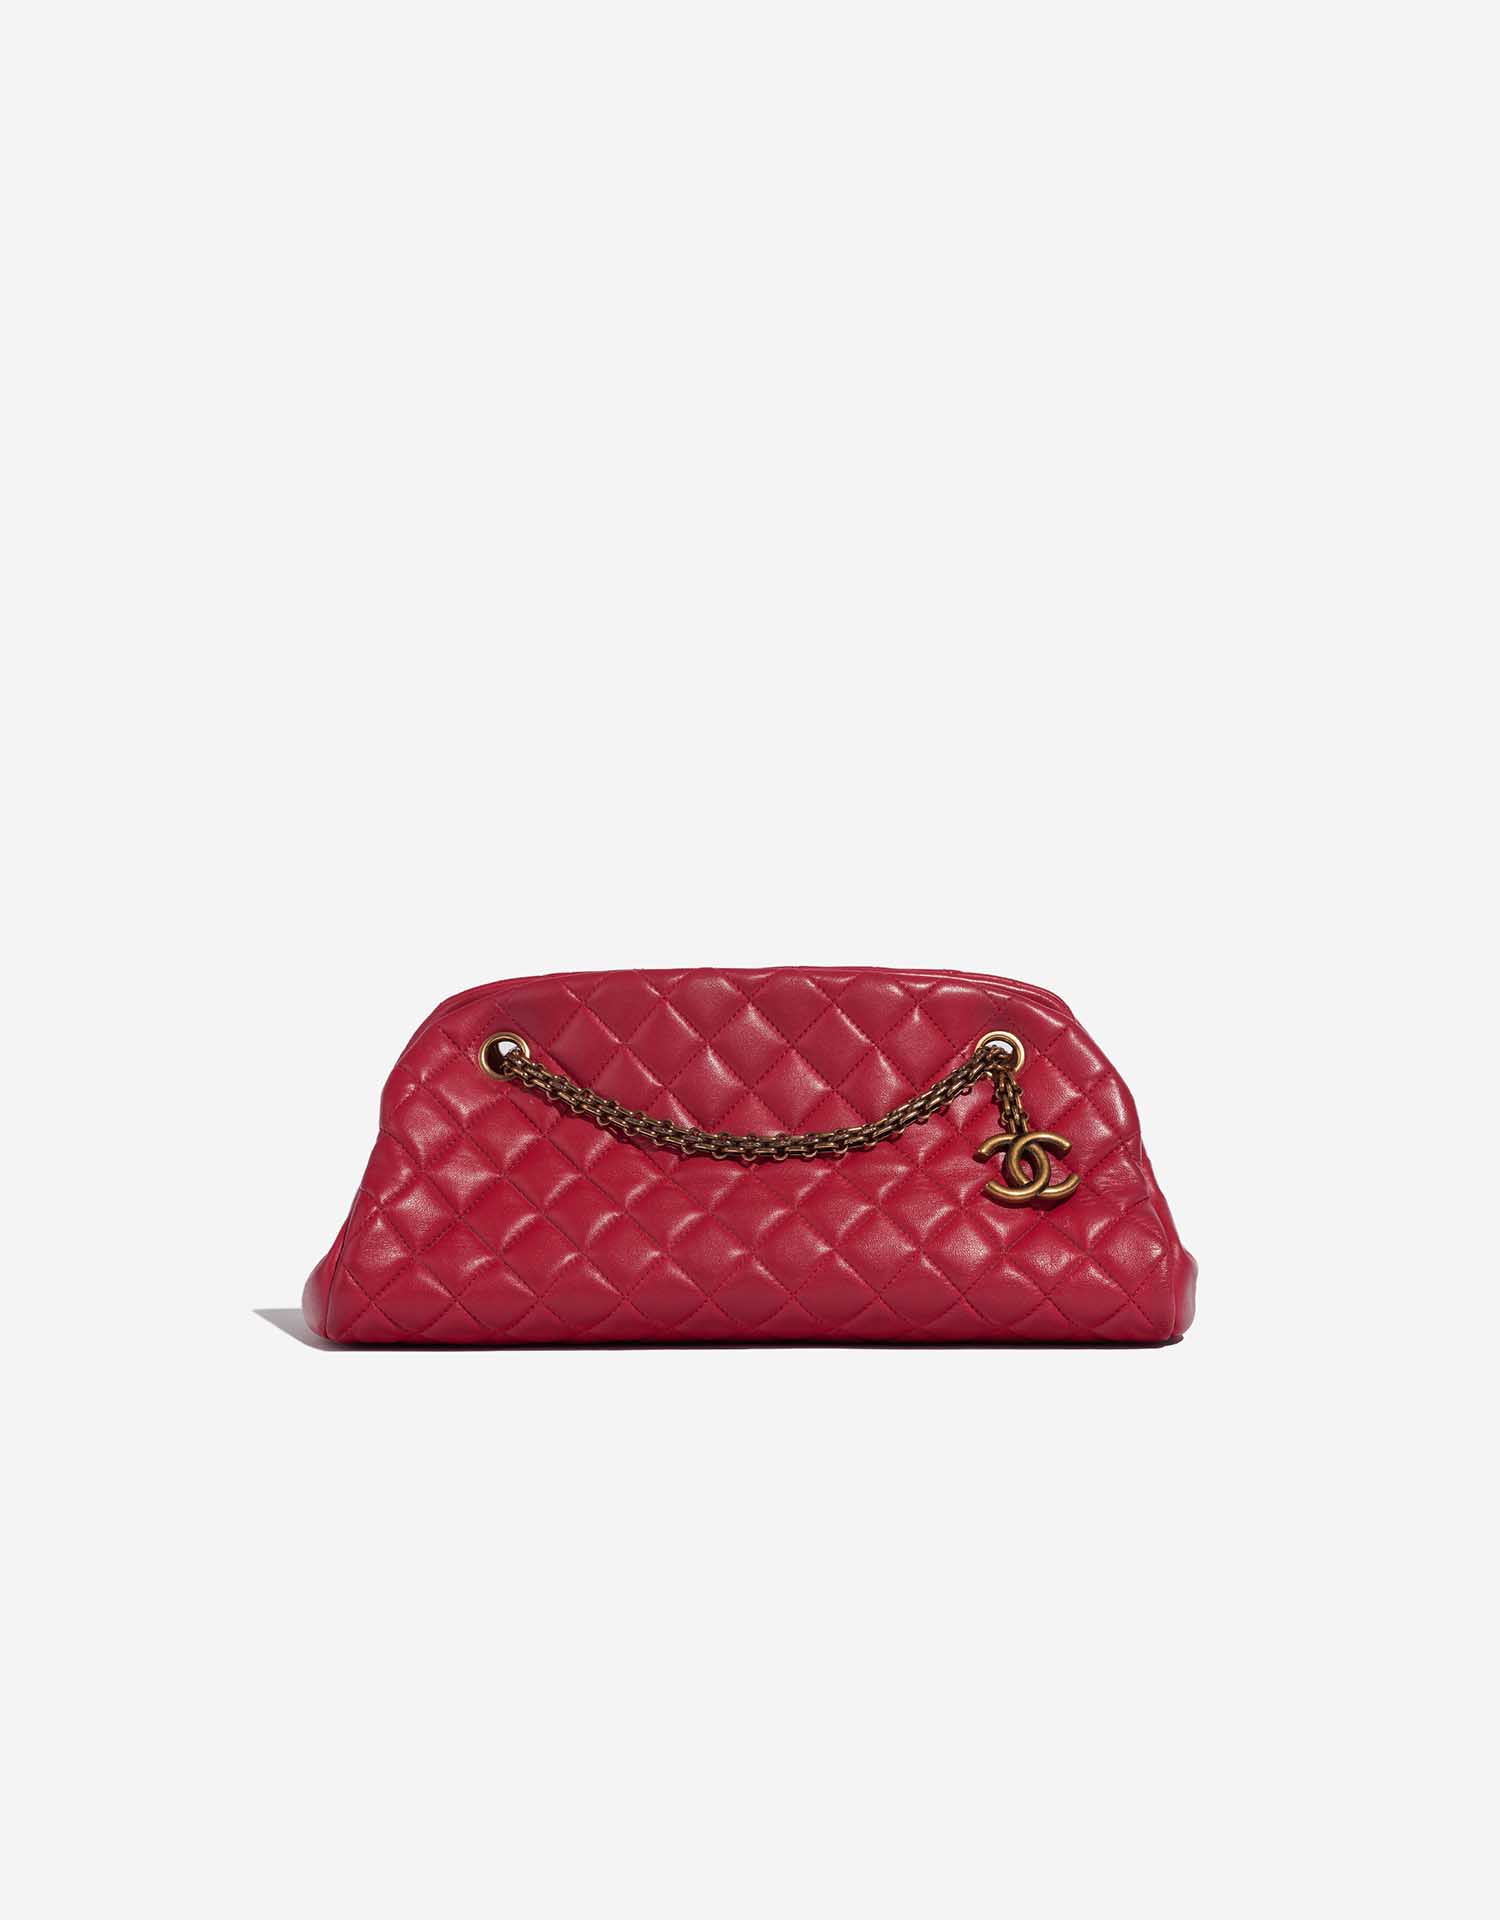 Chanel Red Timeless Just Mademoiselle Leather Bowling Bag Multiple